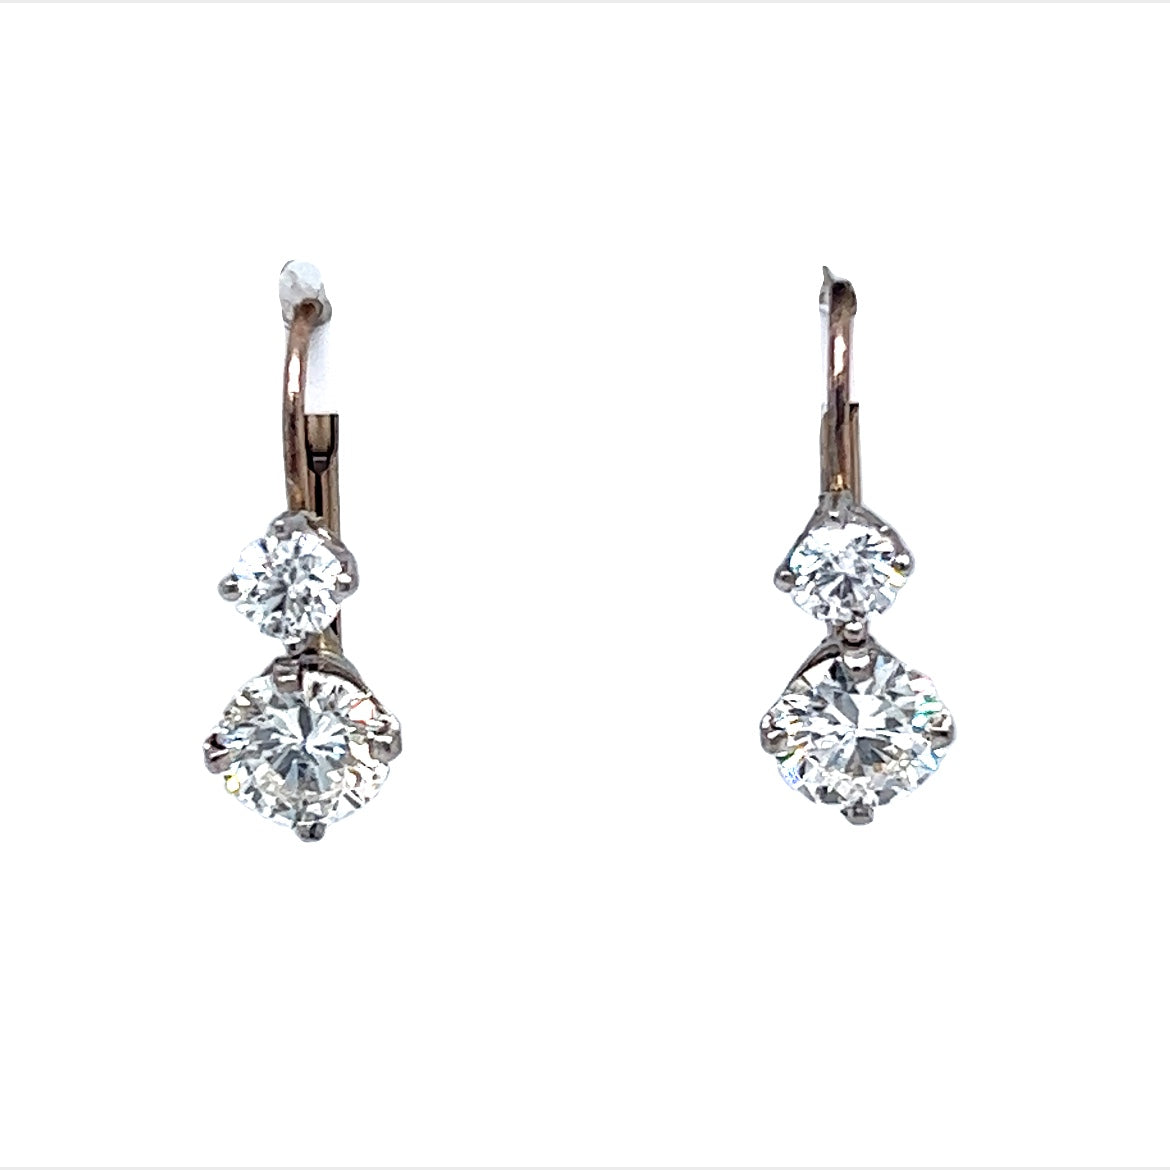 Stacked Round Brilliant Diamond Drop Earrings in 14k White Gold